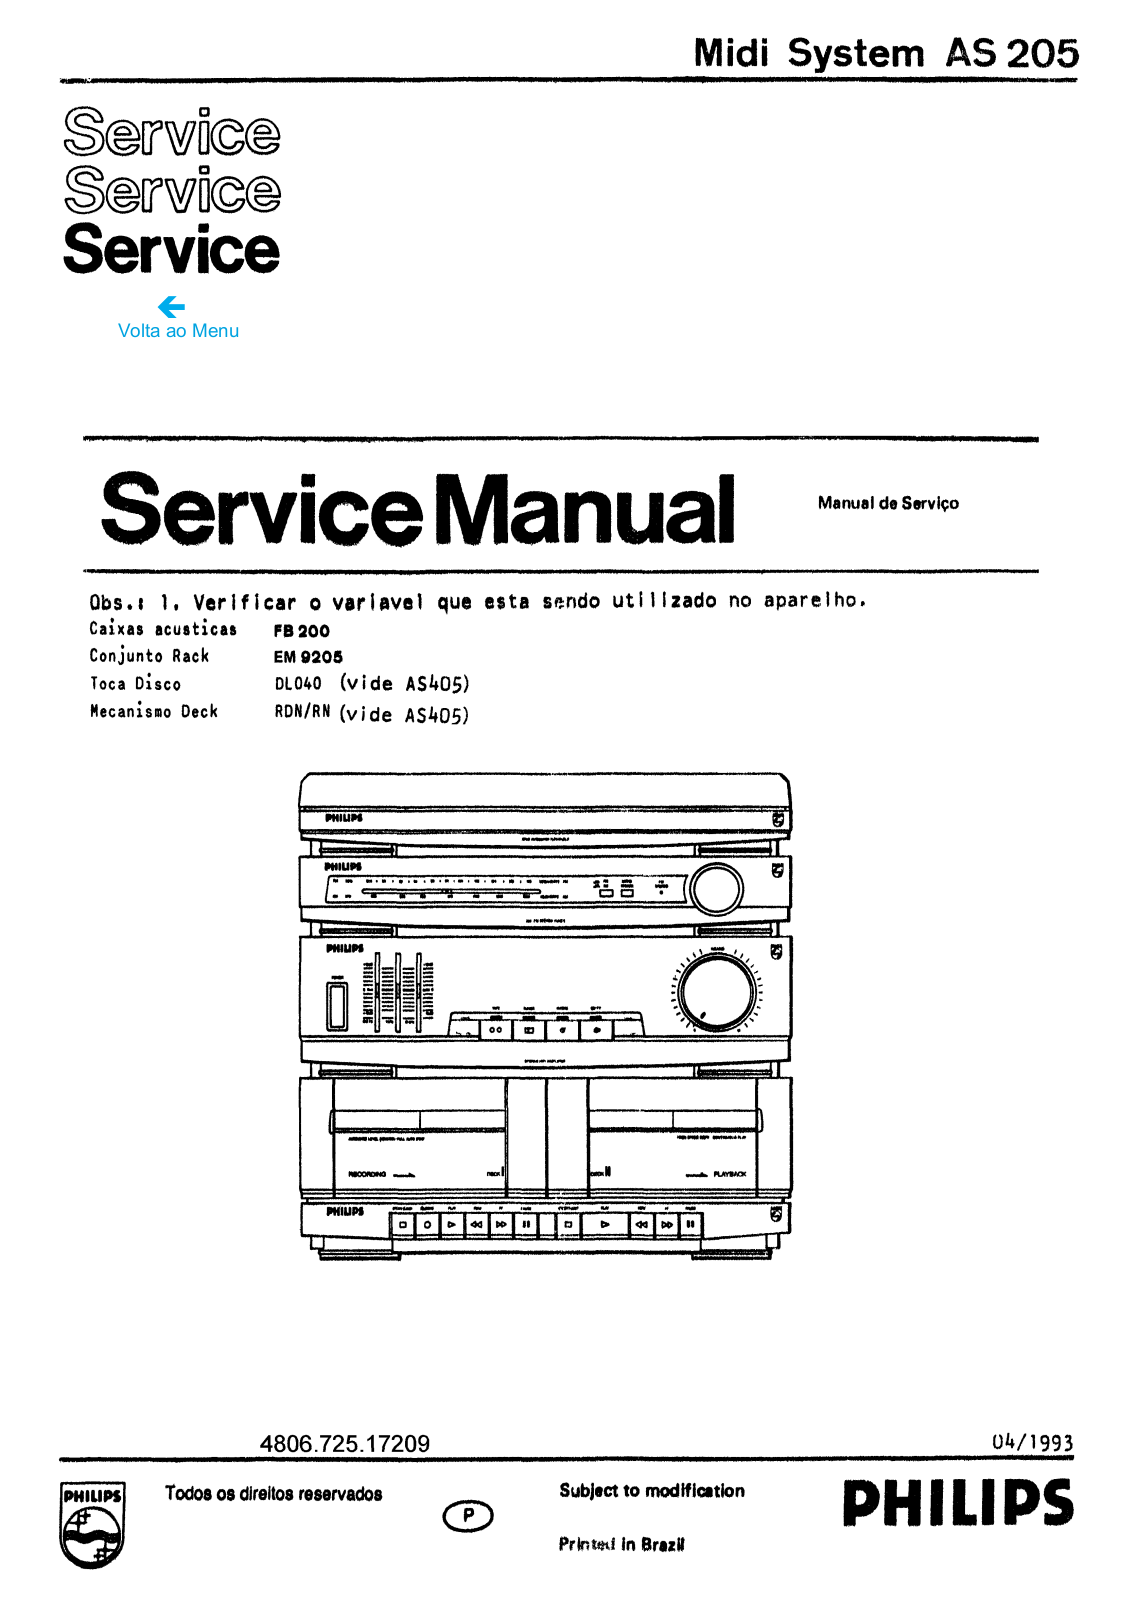 Philips AS-205 Service Manual